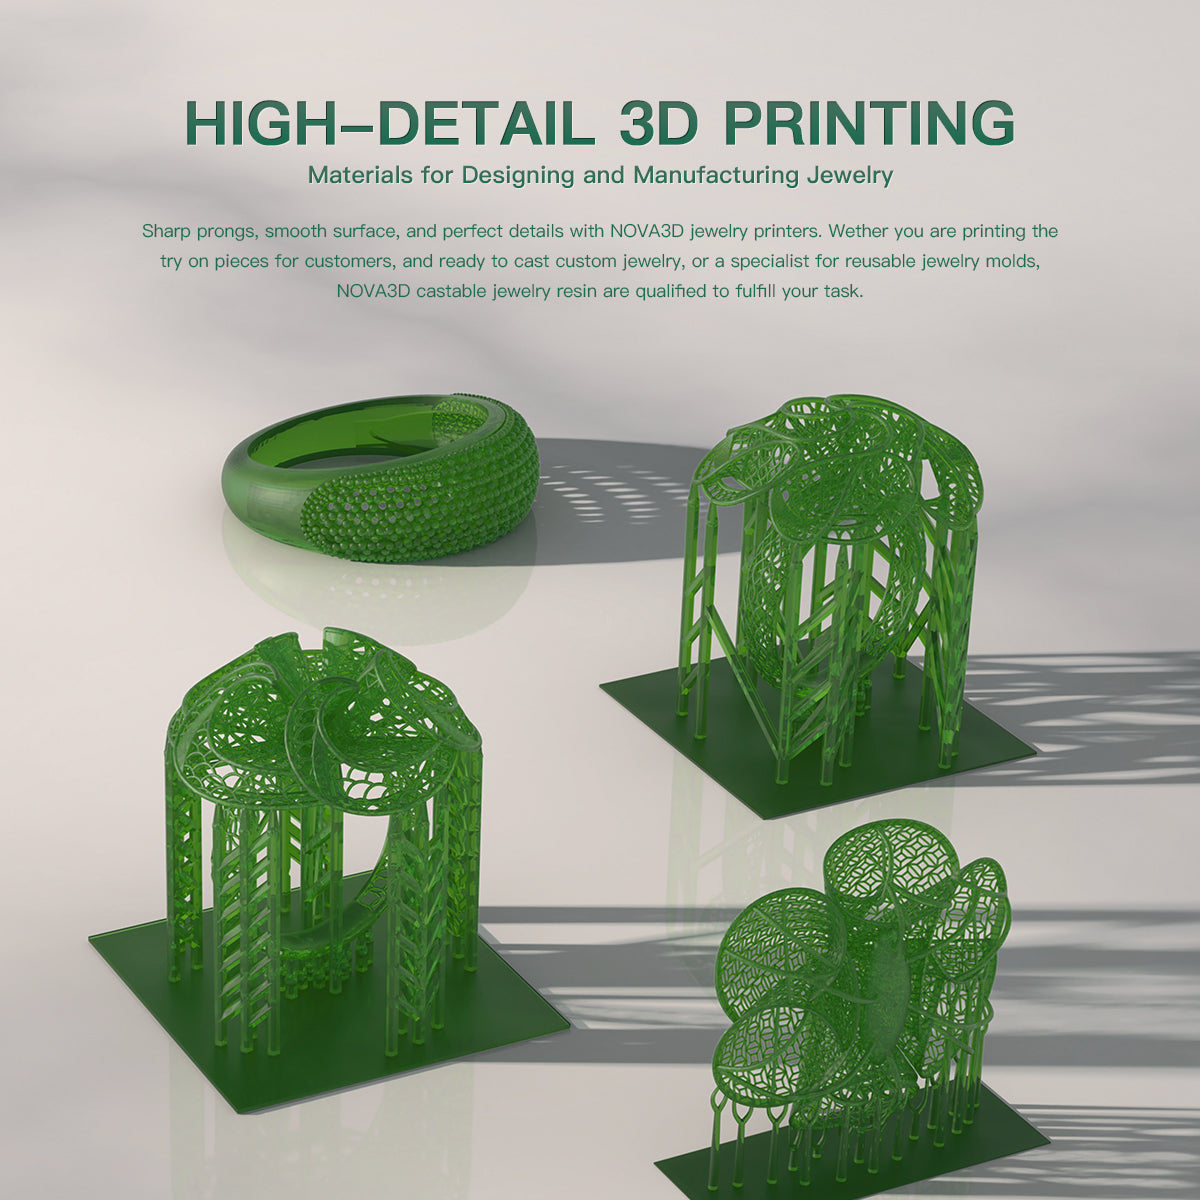 NOVA3D Castable Resin Material for 3D Printing for Jewelry